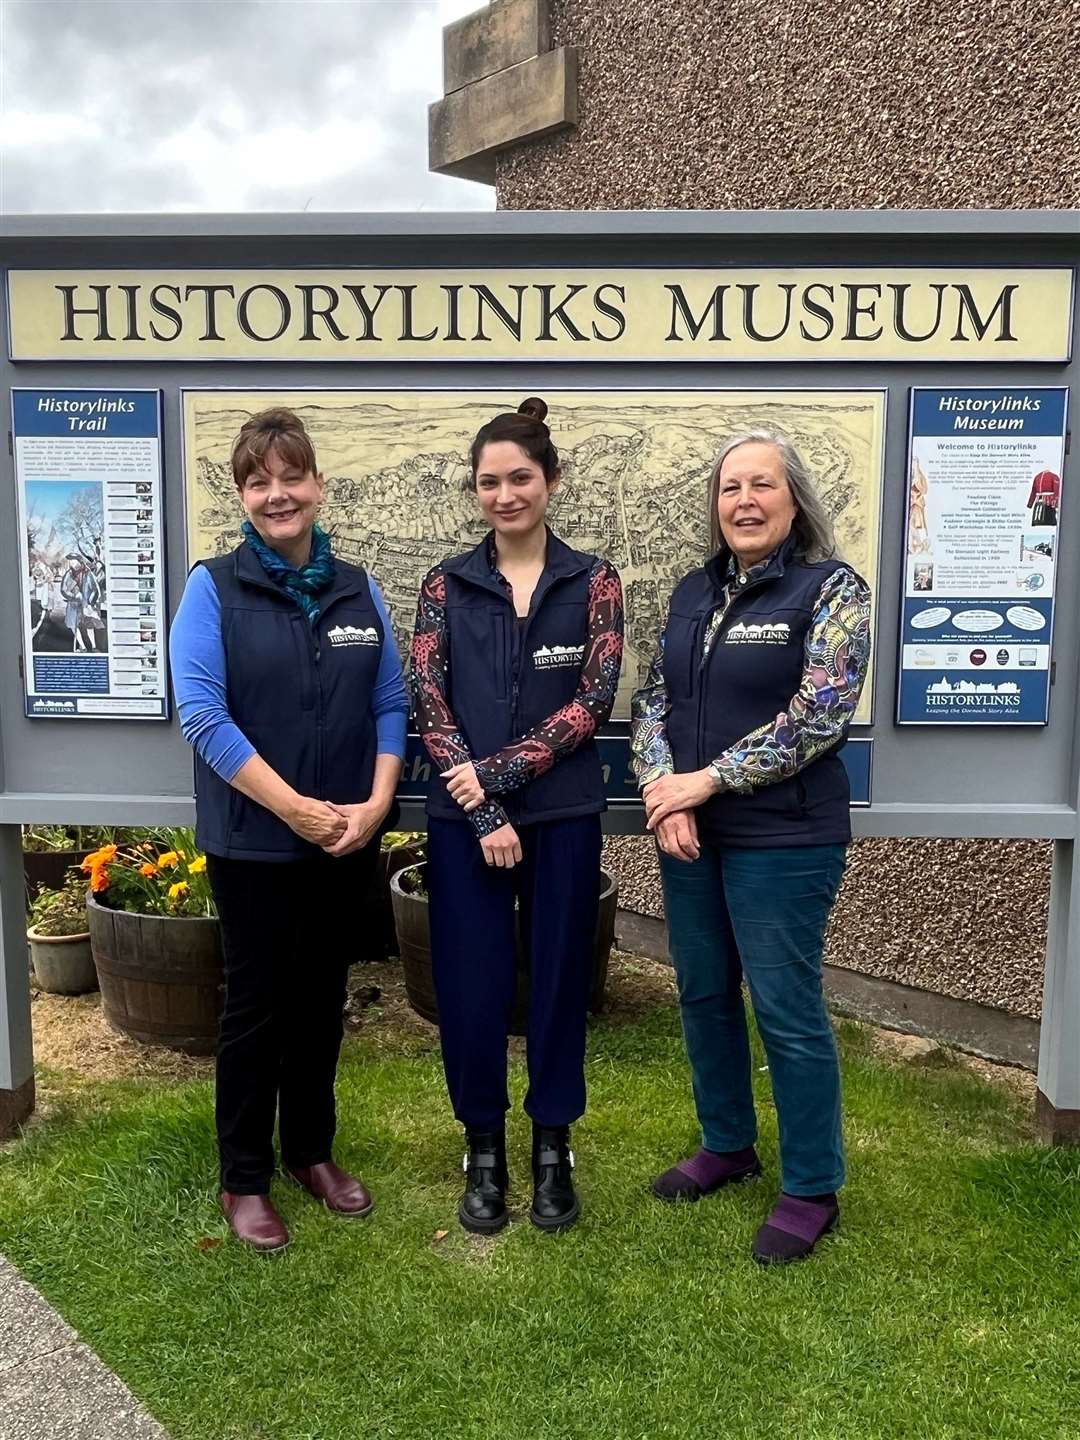 Laura Kasim, centre, with museum curator Lynne Mahoney, left, and museum assistant Caroline Seymour.